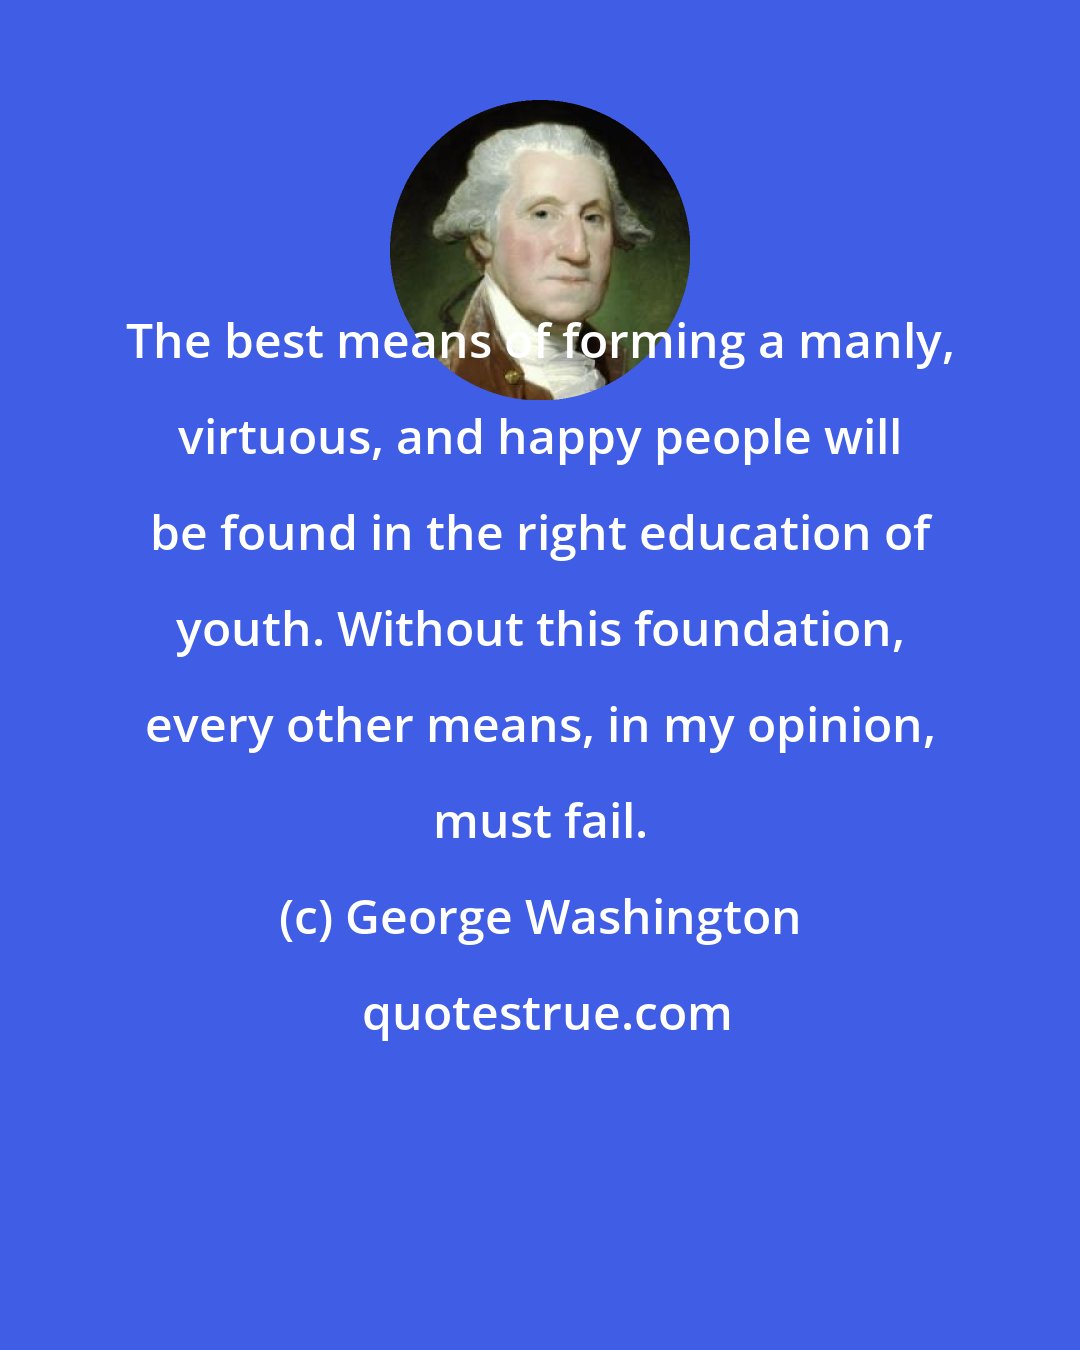 George Washington: The best means of forming a manly, virtuous, and happy people will be found in the right education of youth. Without this foundation, every other means, in my opinion, must fail.